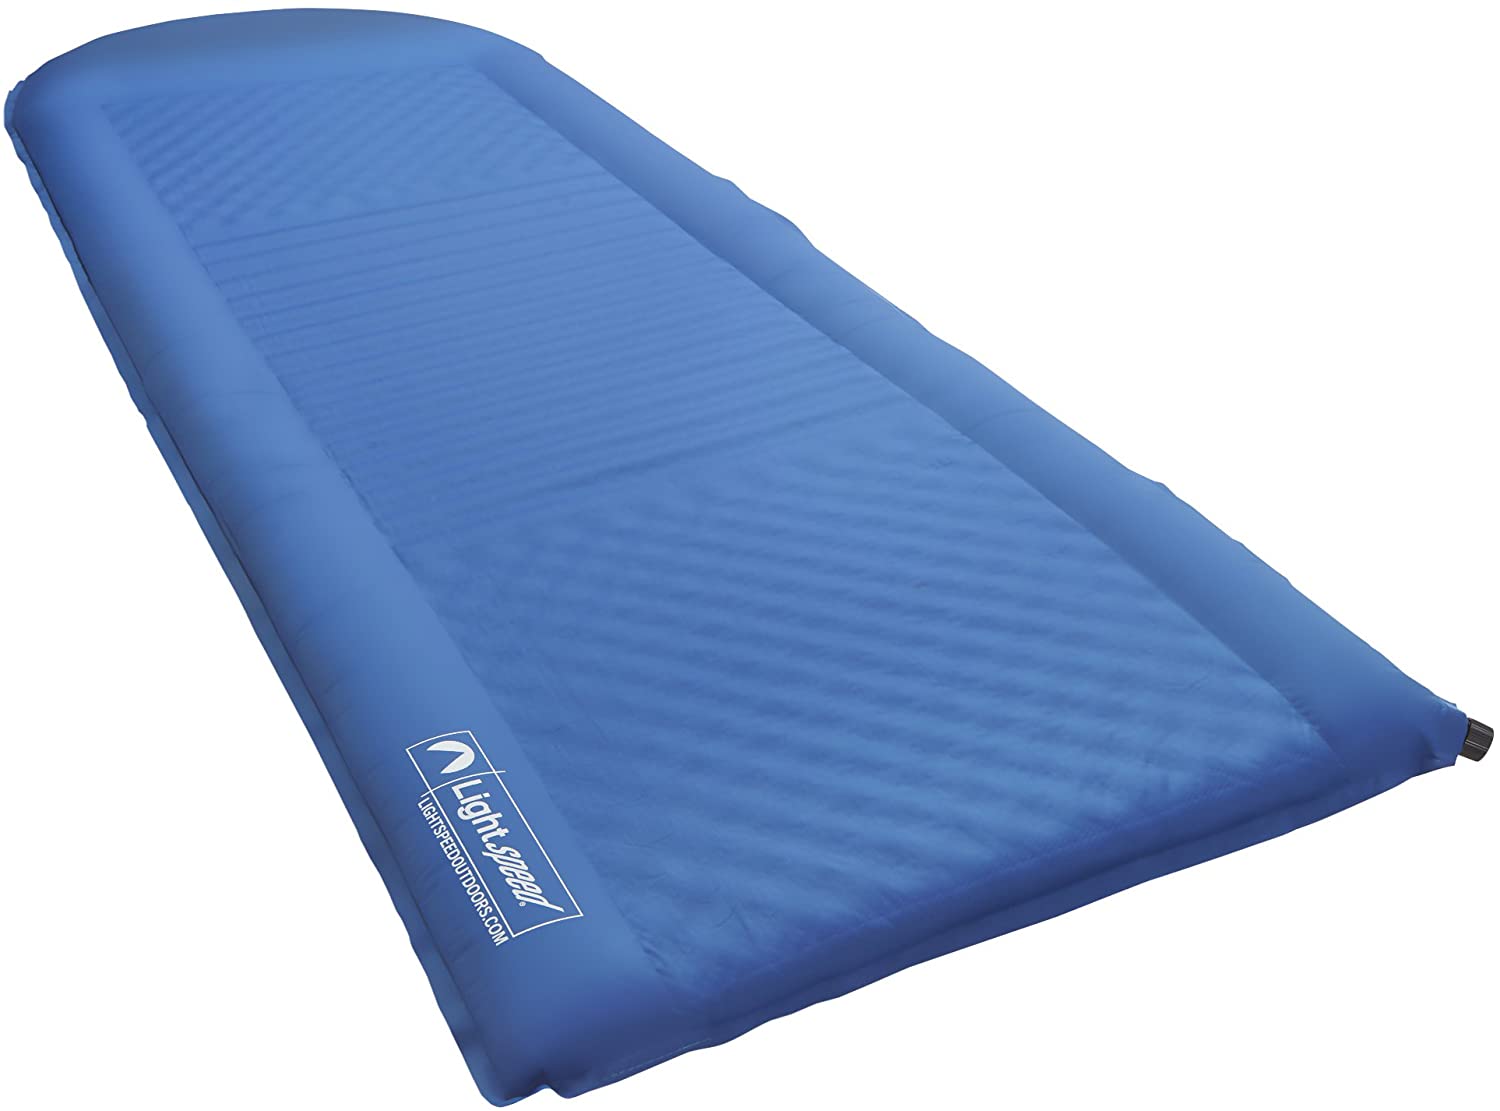 Sleeping Pads/ Cots